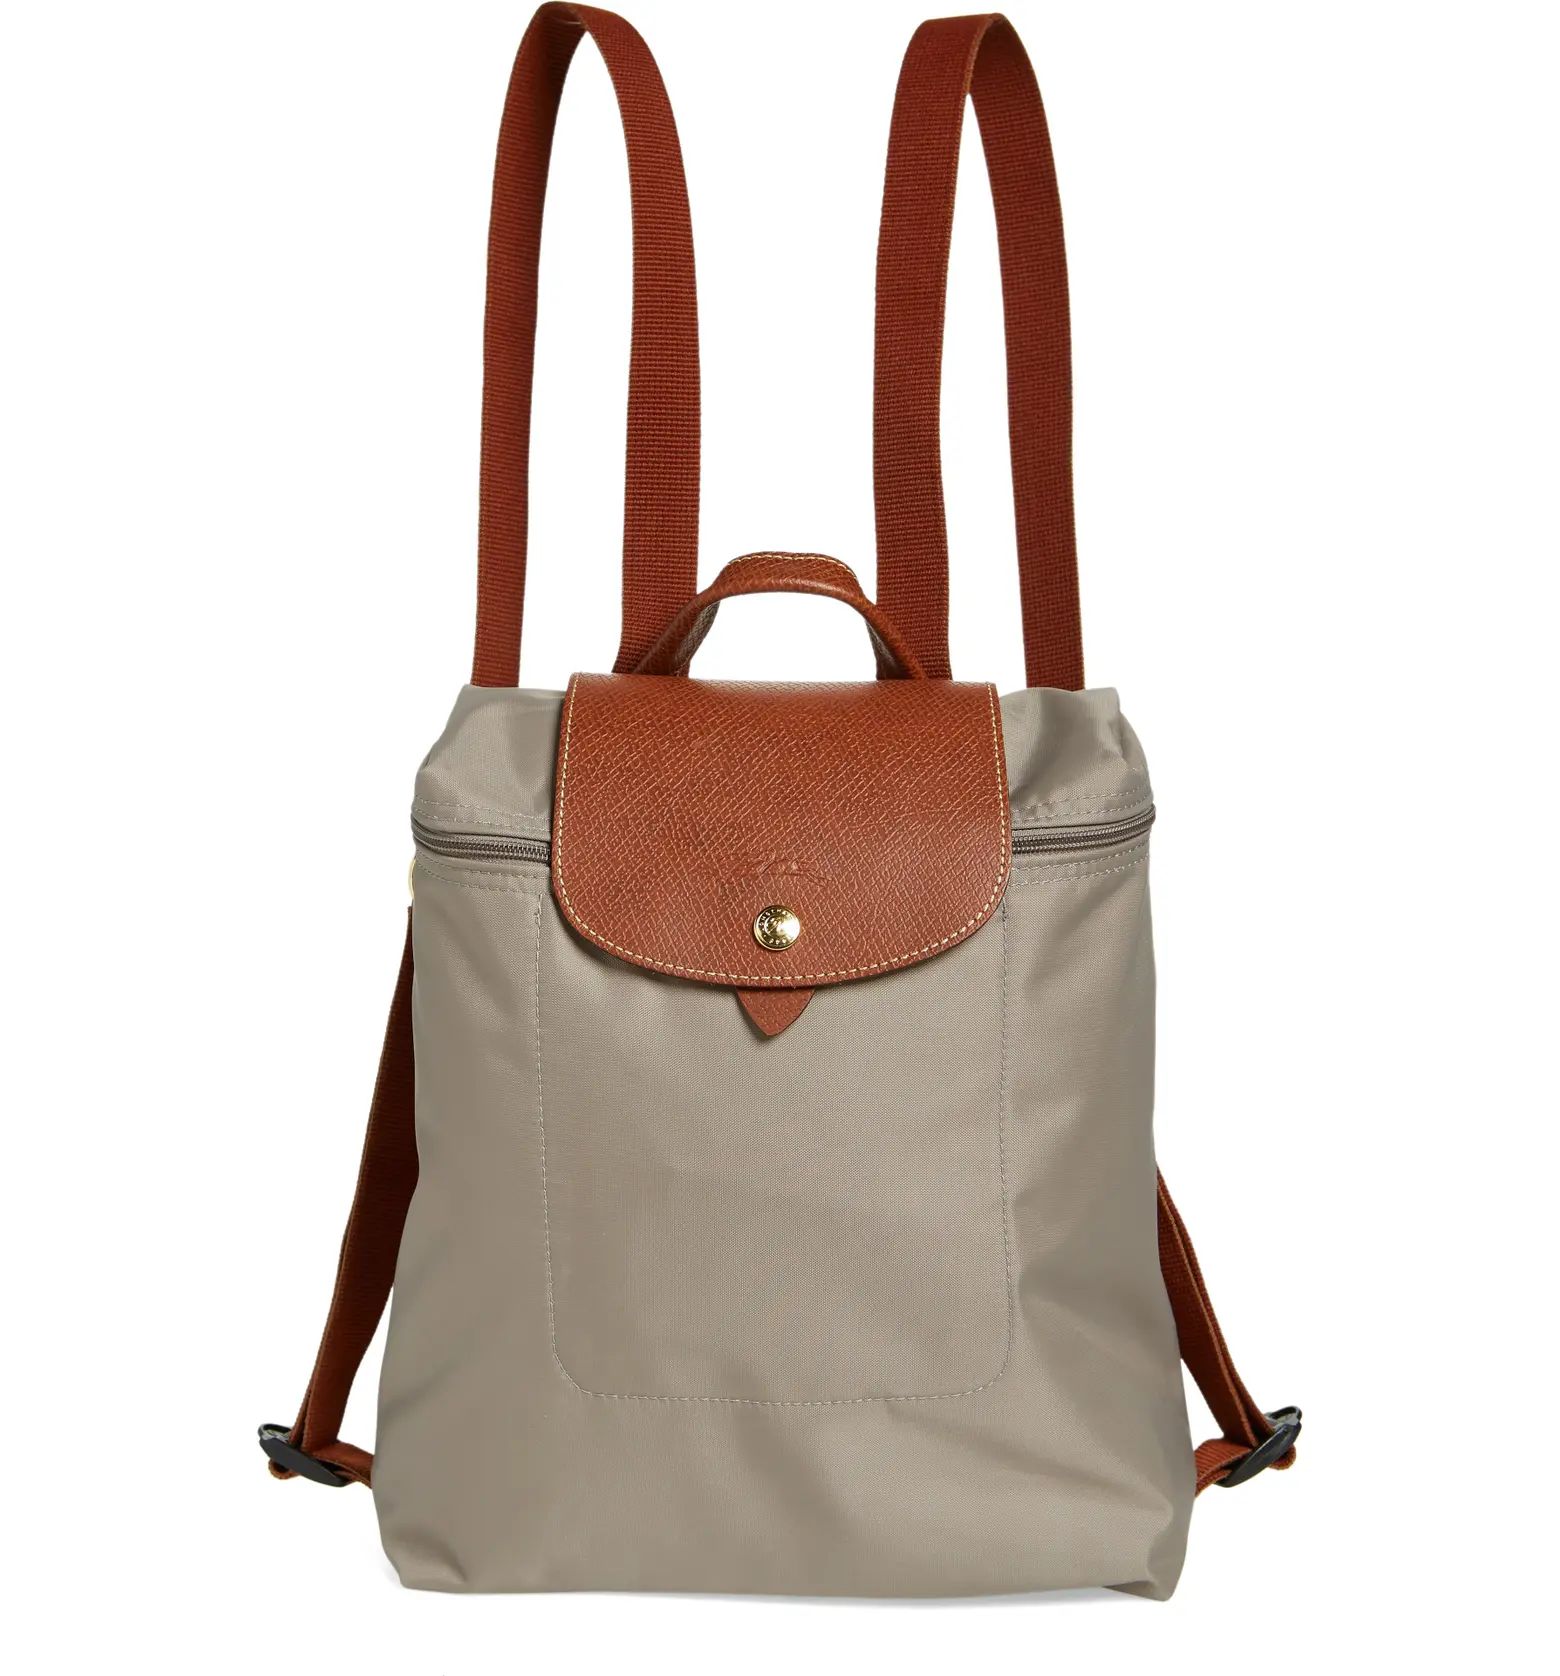 Le Pliage Backpack | Nordstrom